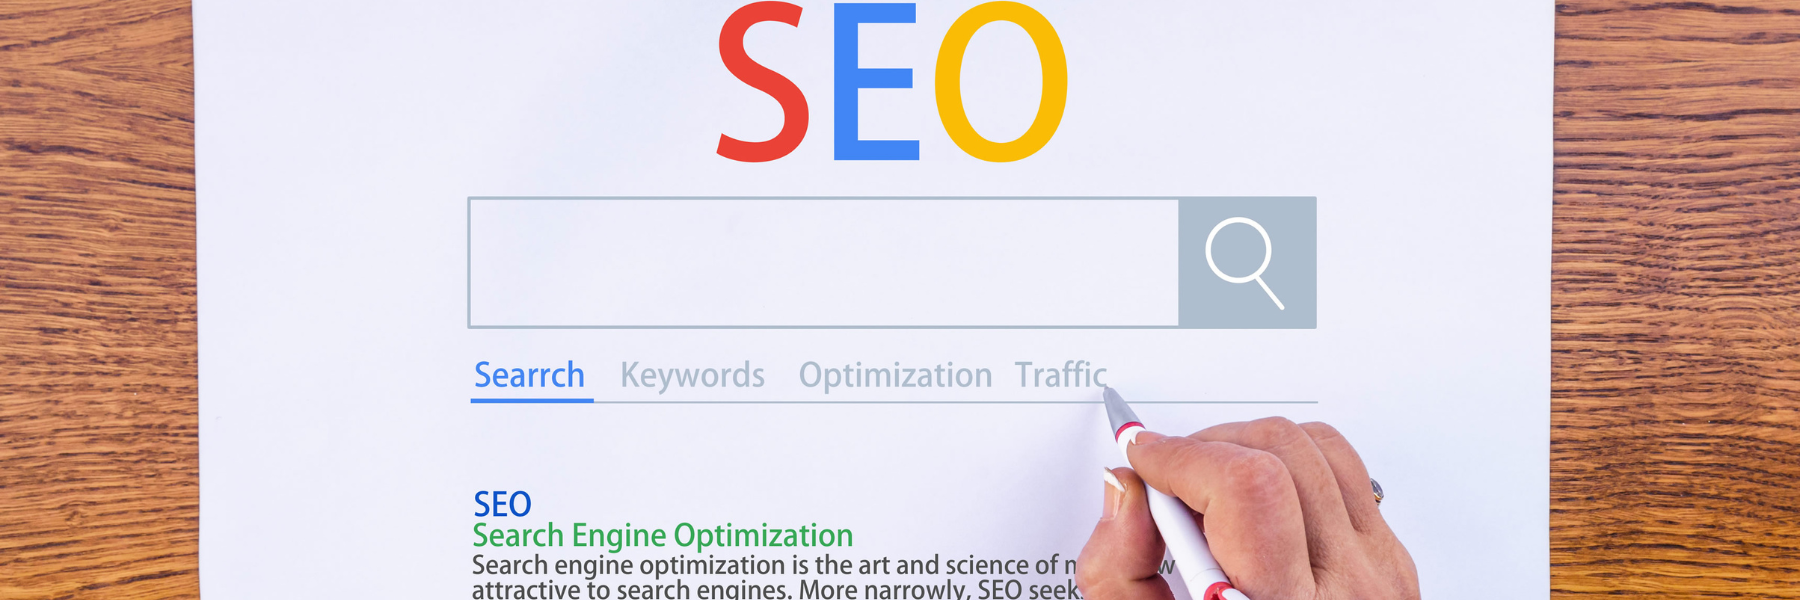 SEO Services and SEO Audit Tools: A Winning Combination for Online Success